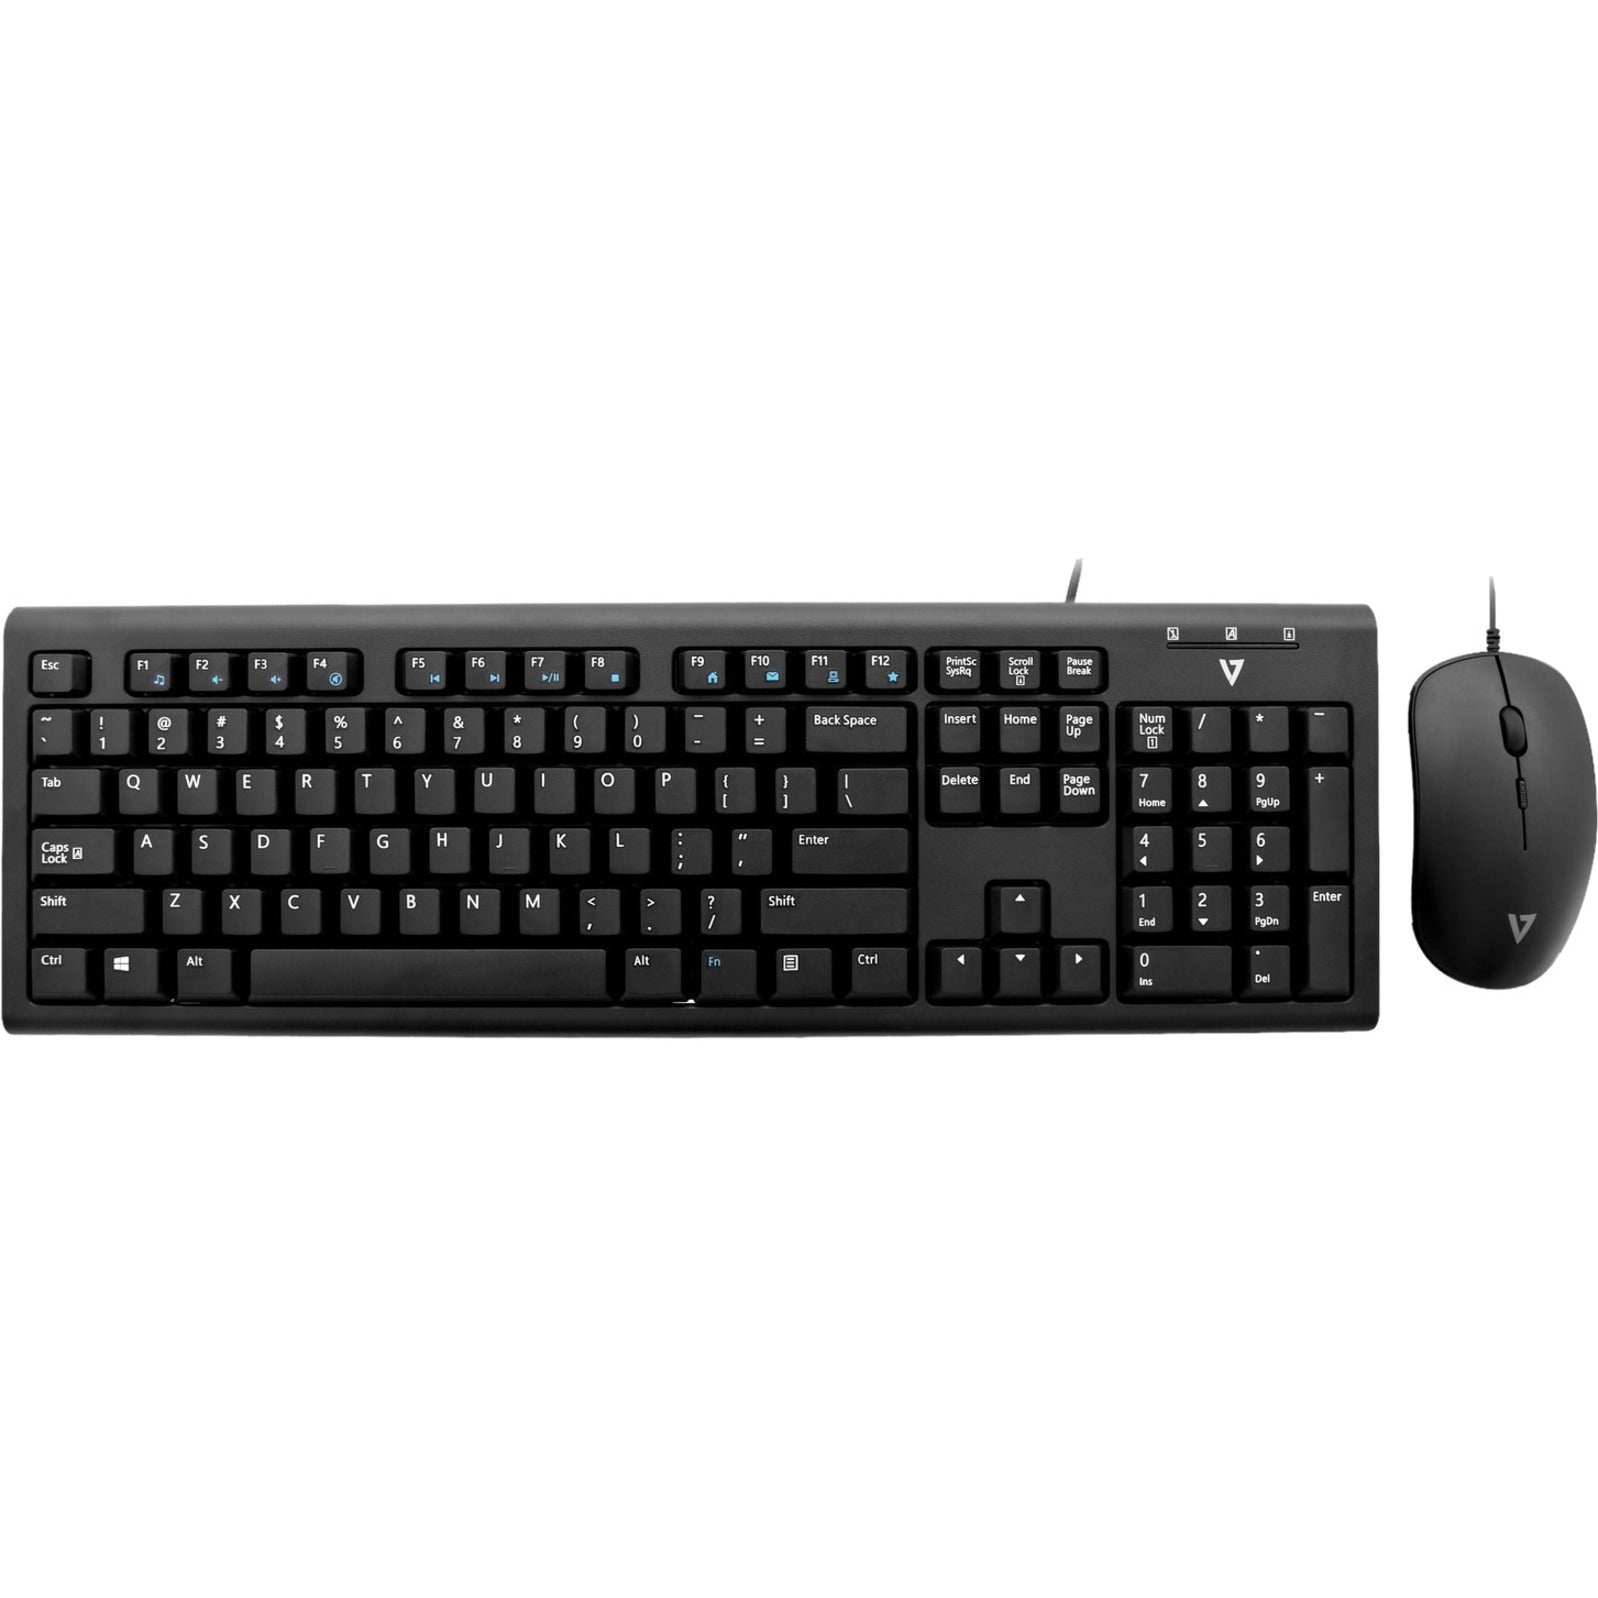 V7 CKU200US Wired Keyboard and Mouse Combo, Spill Resistant, Adjustable Feet, Symmetrical Mouse, 1600 dpi, USB Interface [Discontinued]